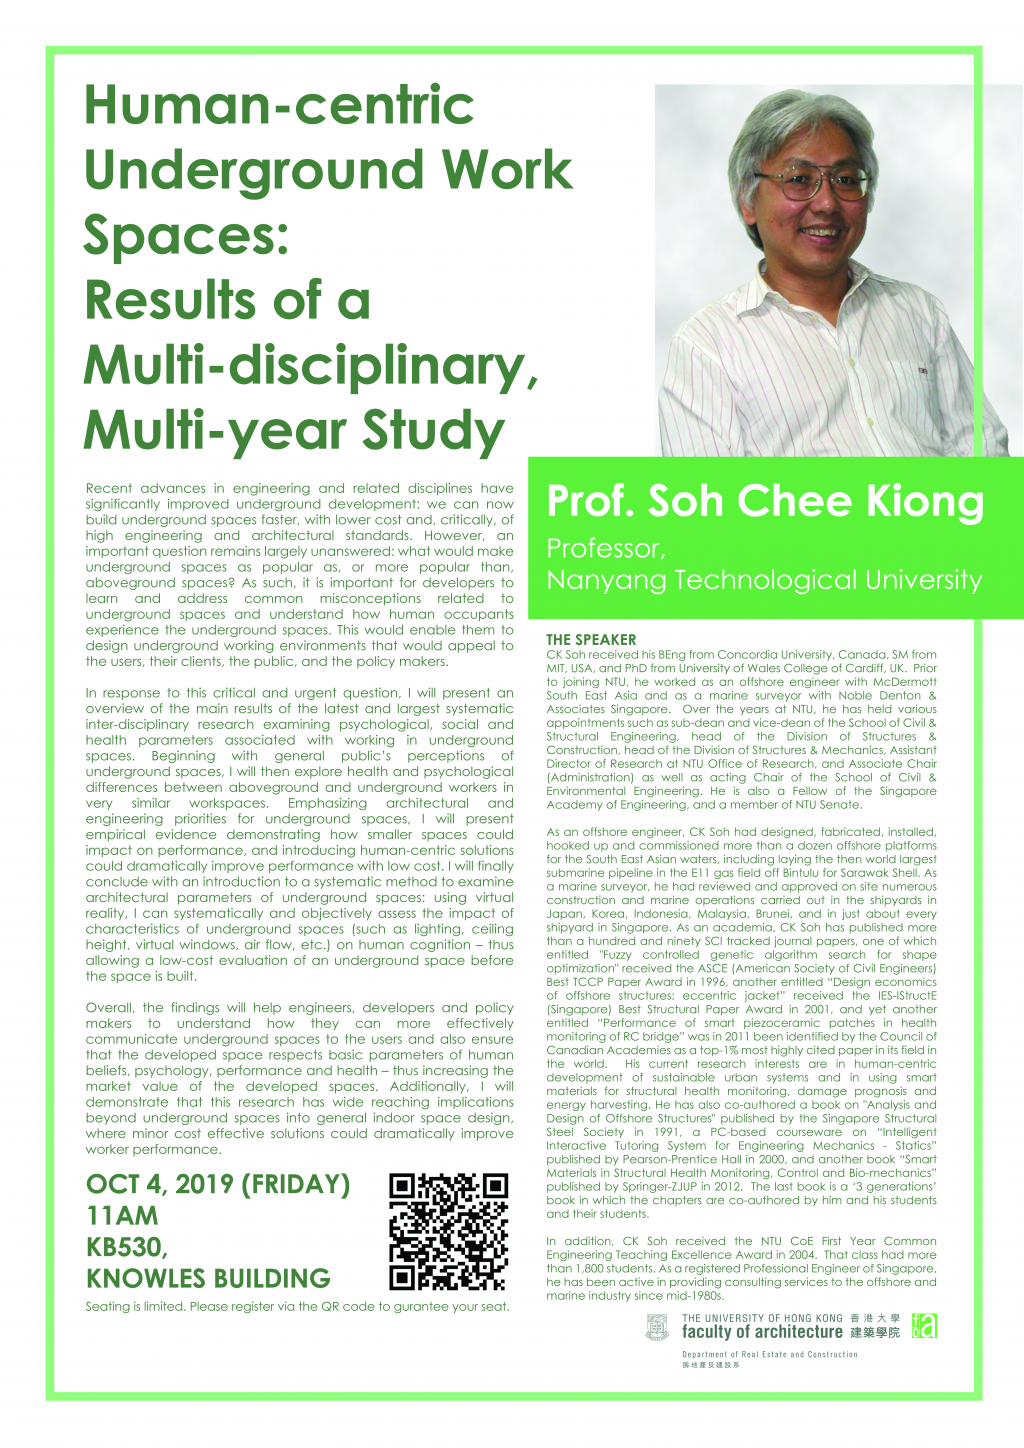 Seminar by Prof. Soh Chee Kiong - Human-centric Underground Work Spaces: Results of a Multi-disciplinary, Multi-year Study